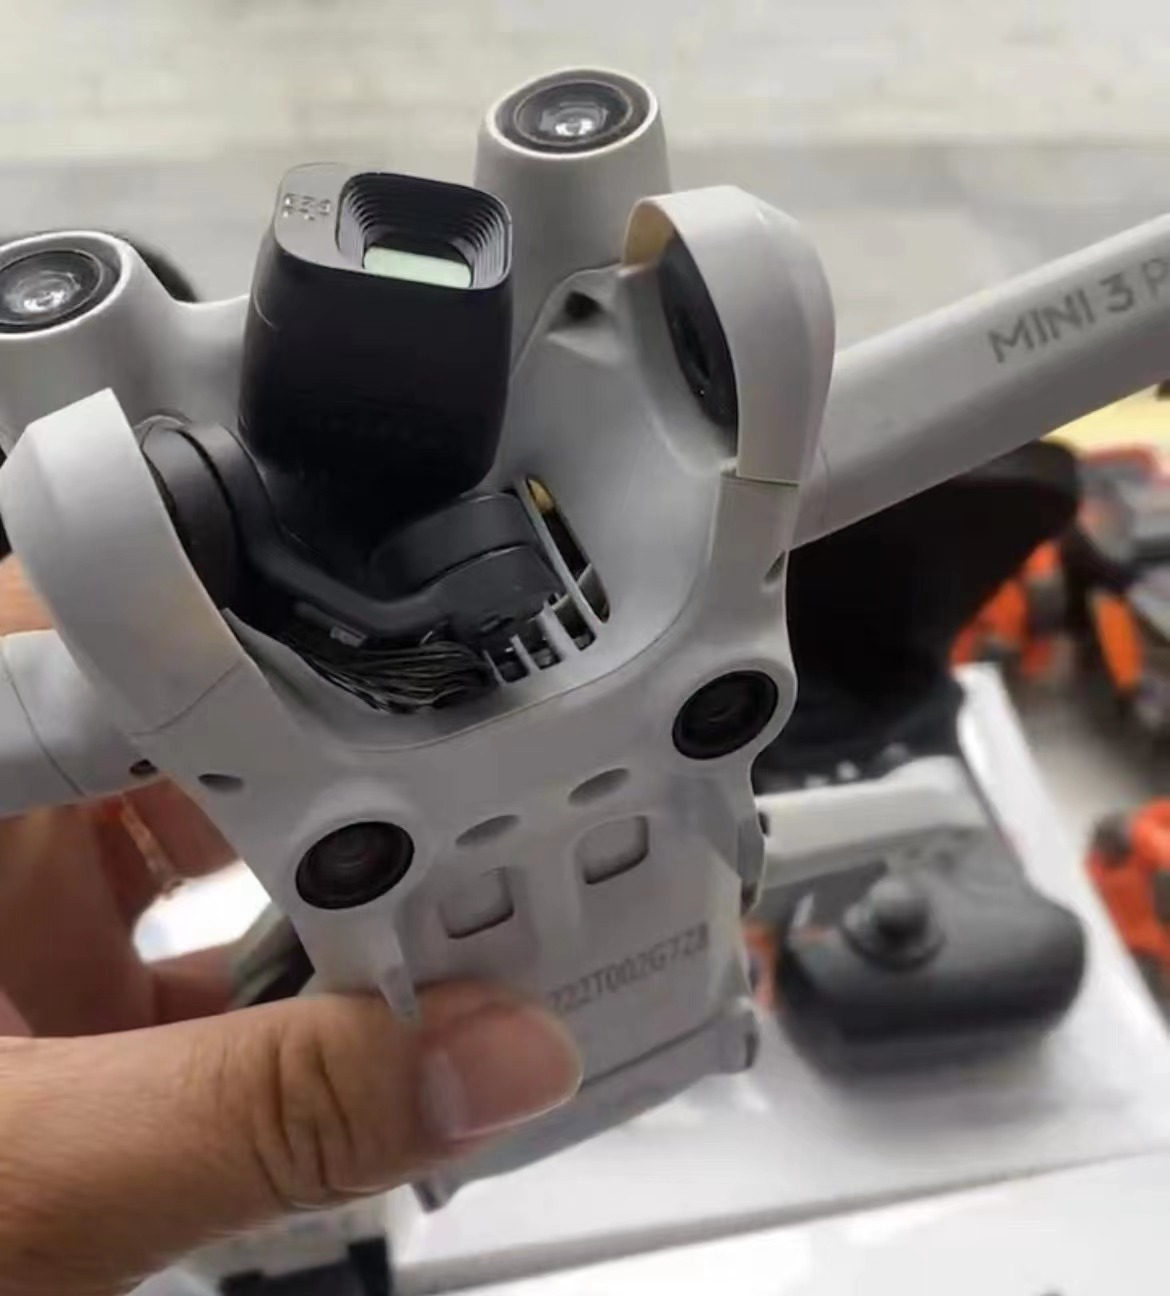 DJI Mini 3 Pro: Longer flight time, better camera and obstacle avoidance function?